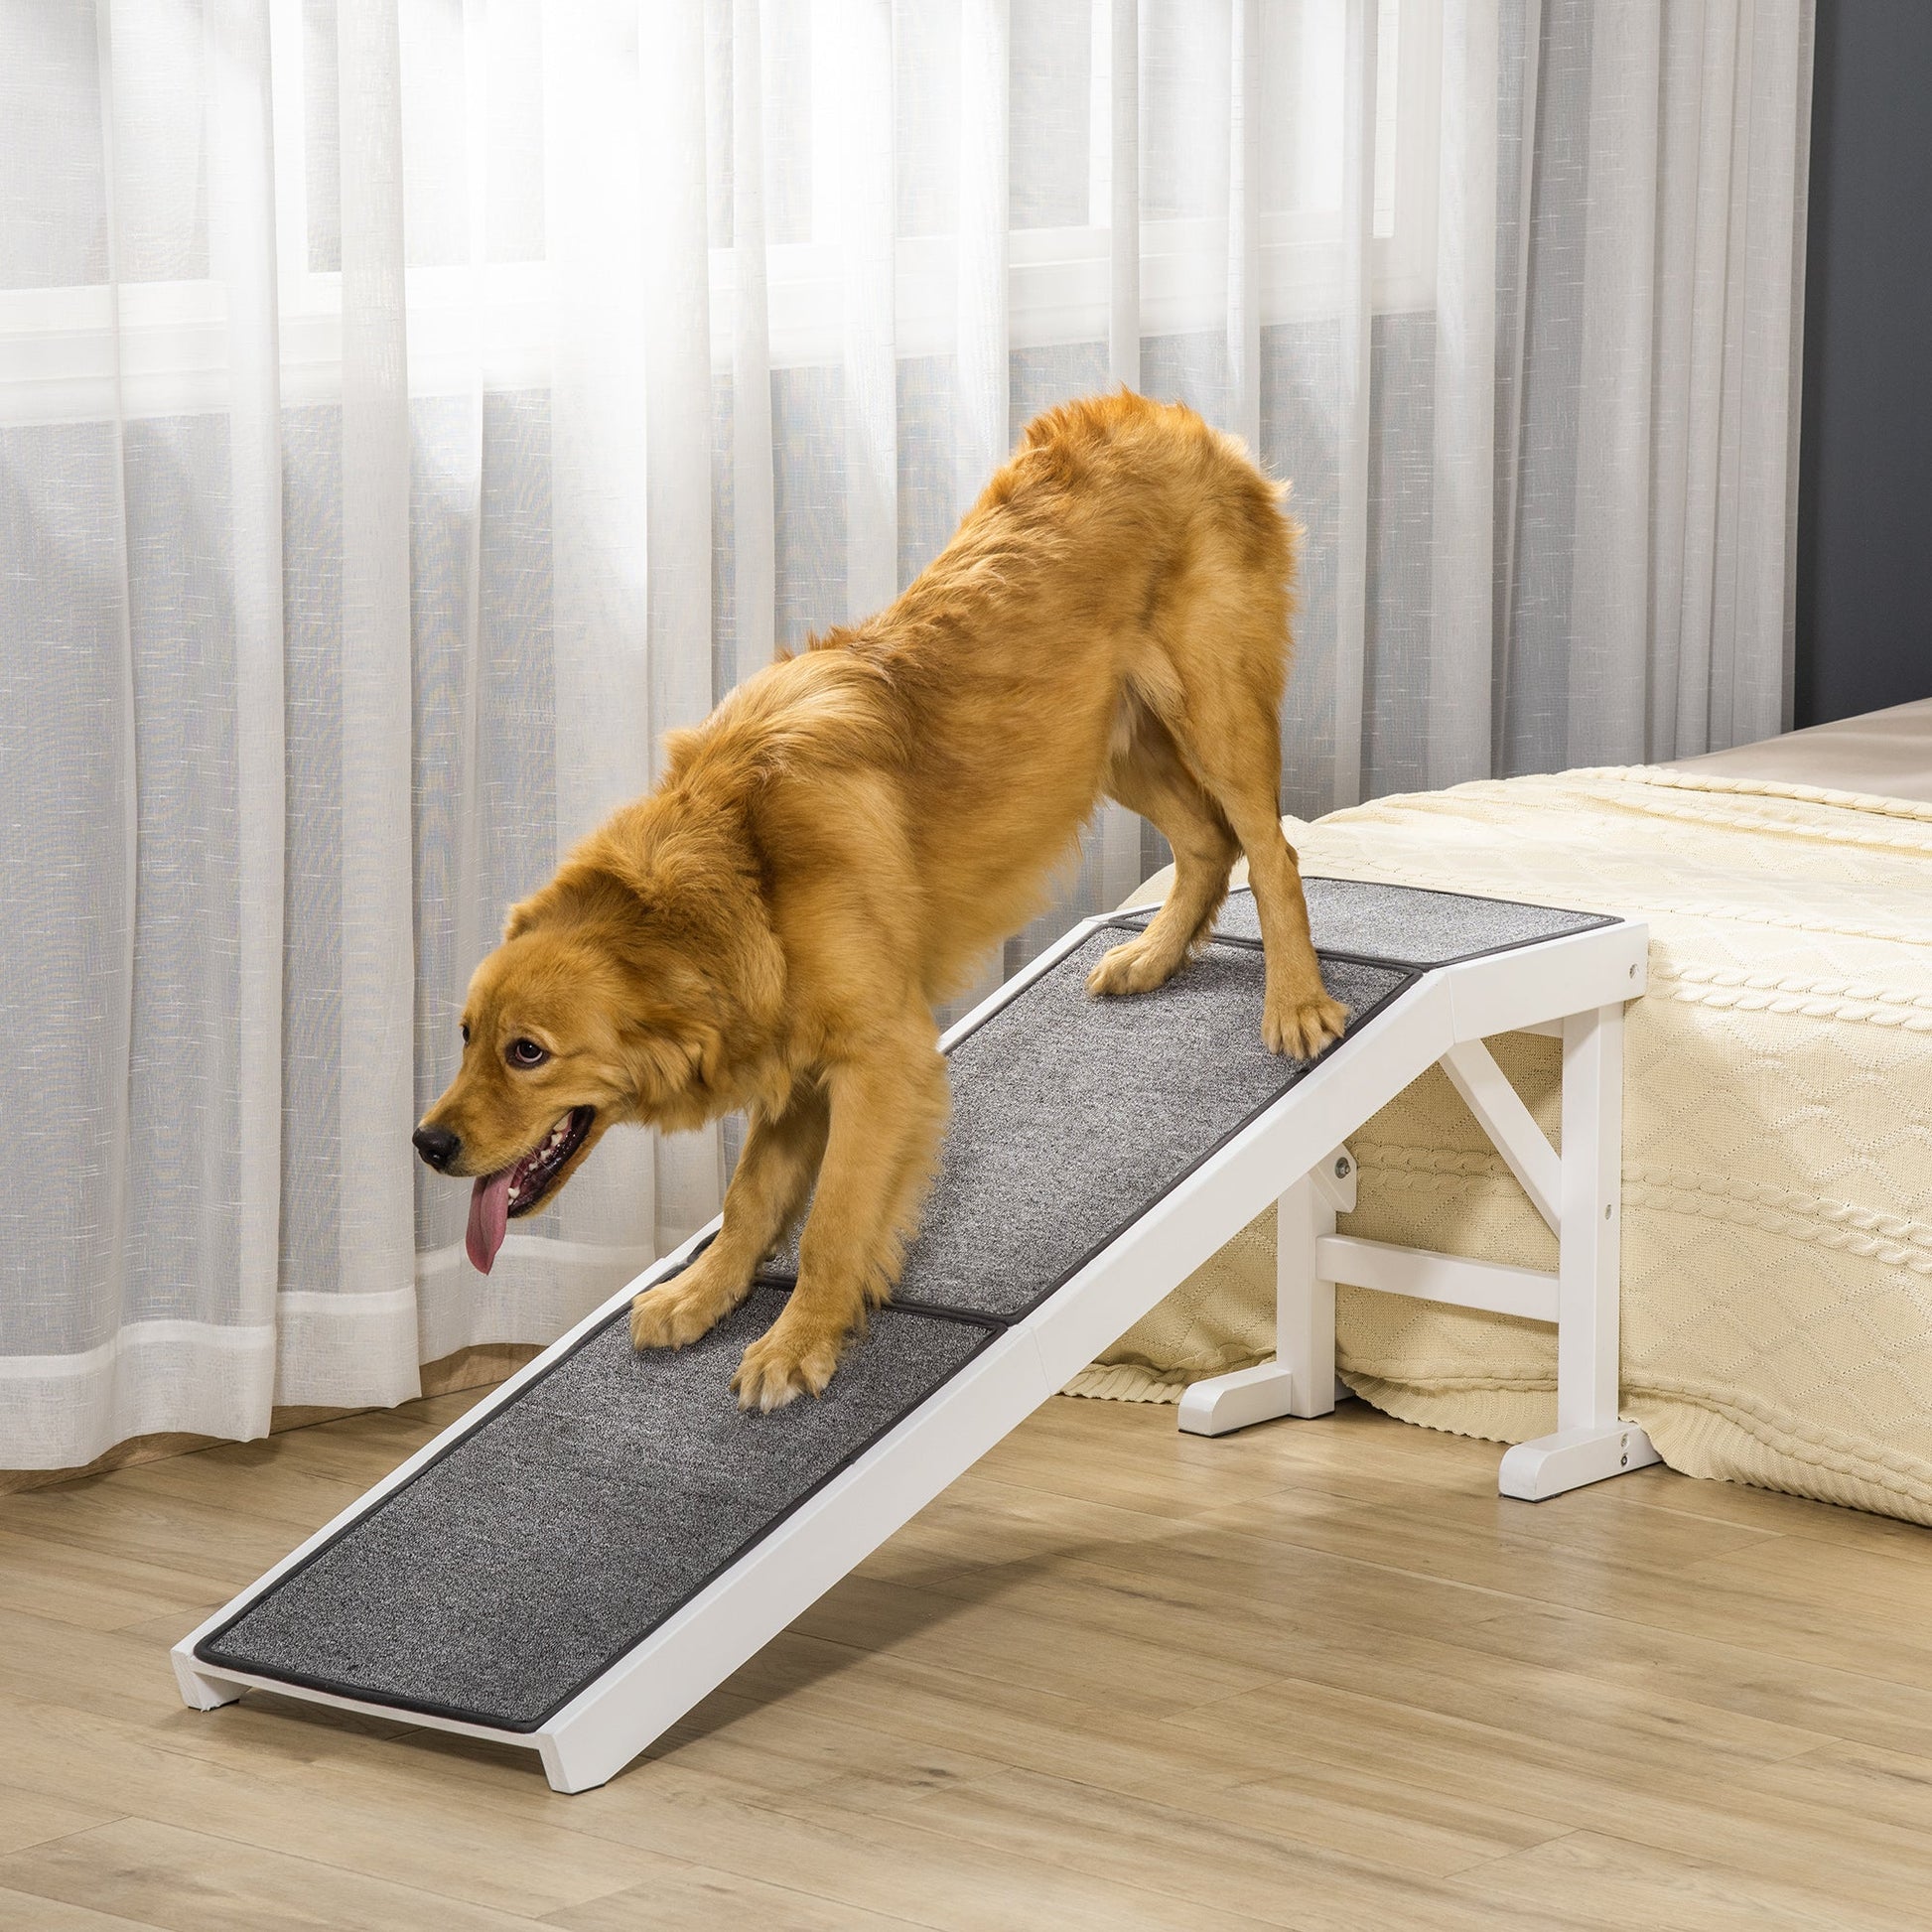 Pet Ramp Bed Steps for Dogs Cats Non-slip Carpet Top Platform Pine Wood 59"L x 16"W x 20"H White Grey - Gallery Canada